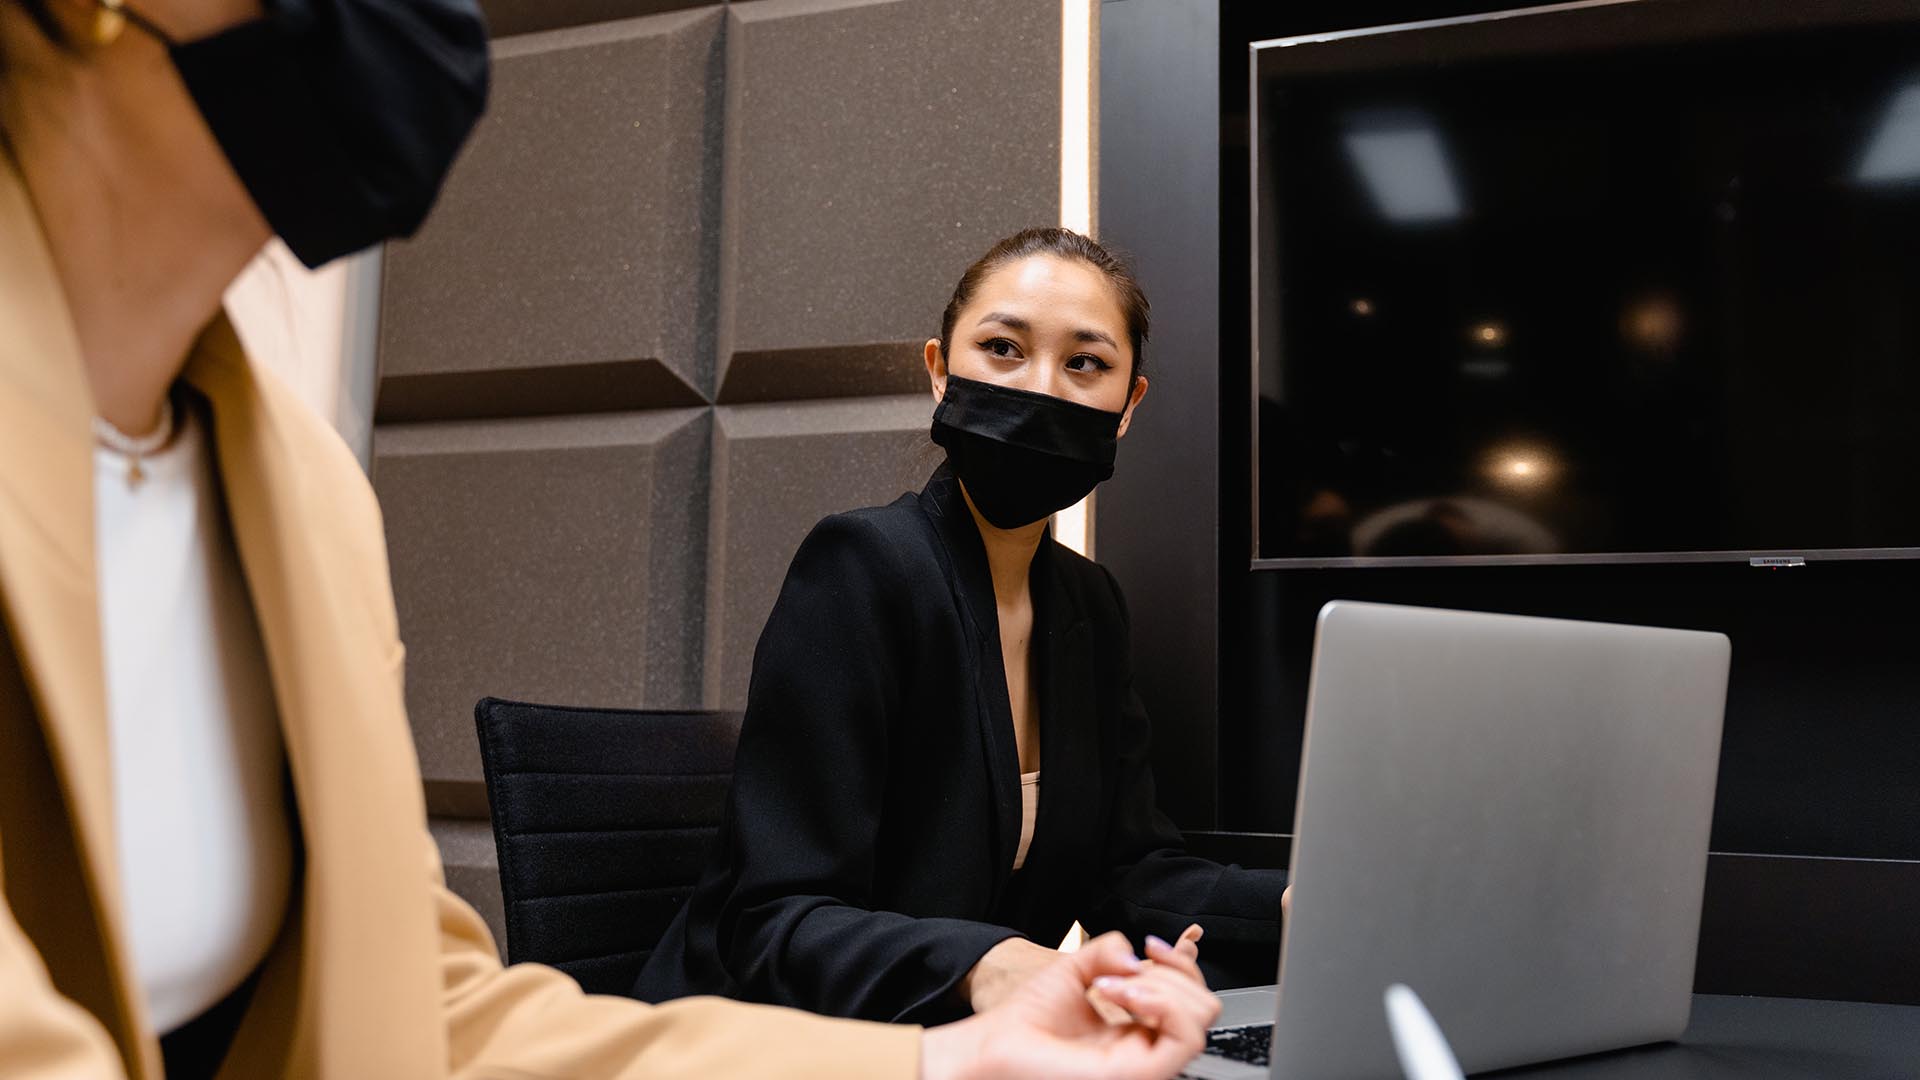 Workers wearing masks in office